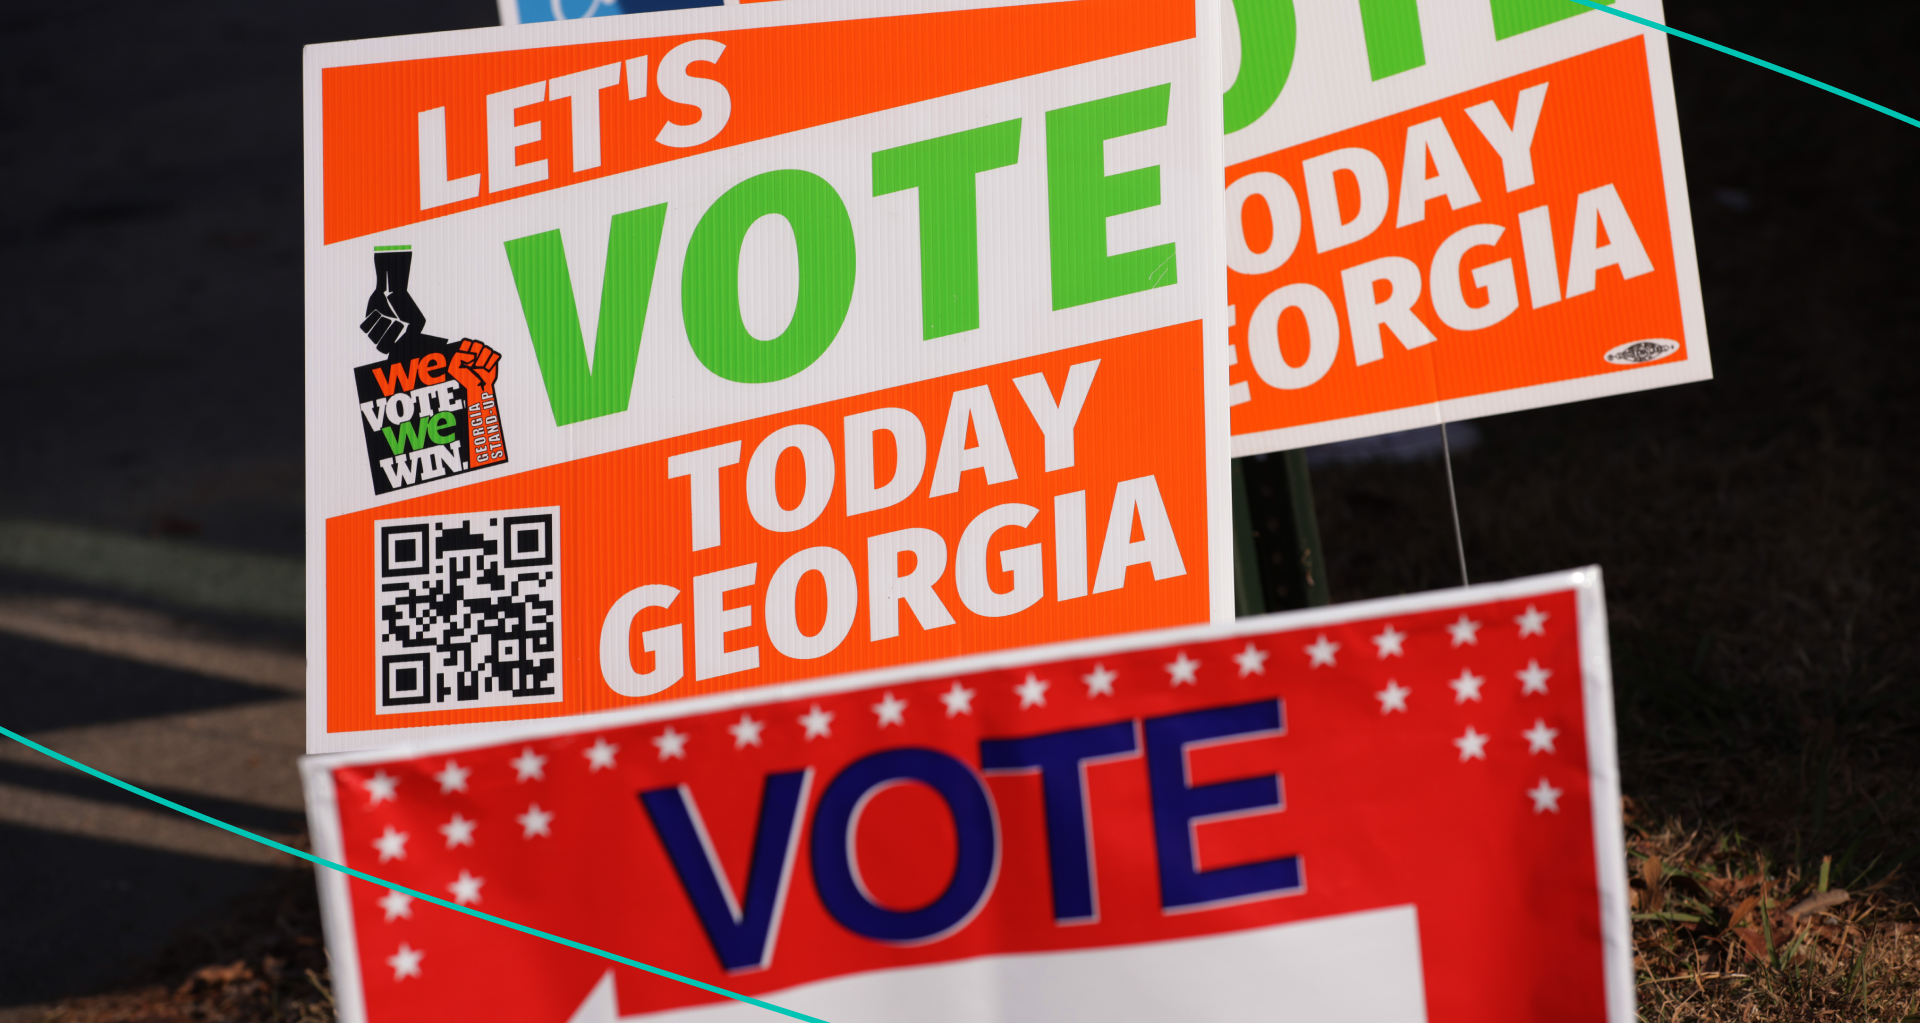 Signs that encourage people to vote are seen outside a polling station on November 29, 2022 in Atlanta, Georgia.